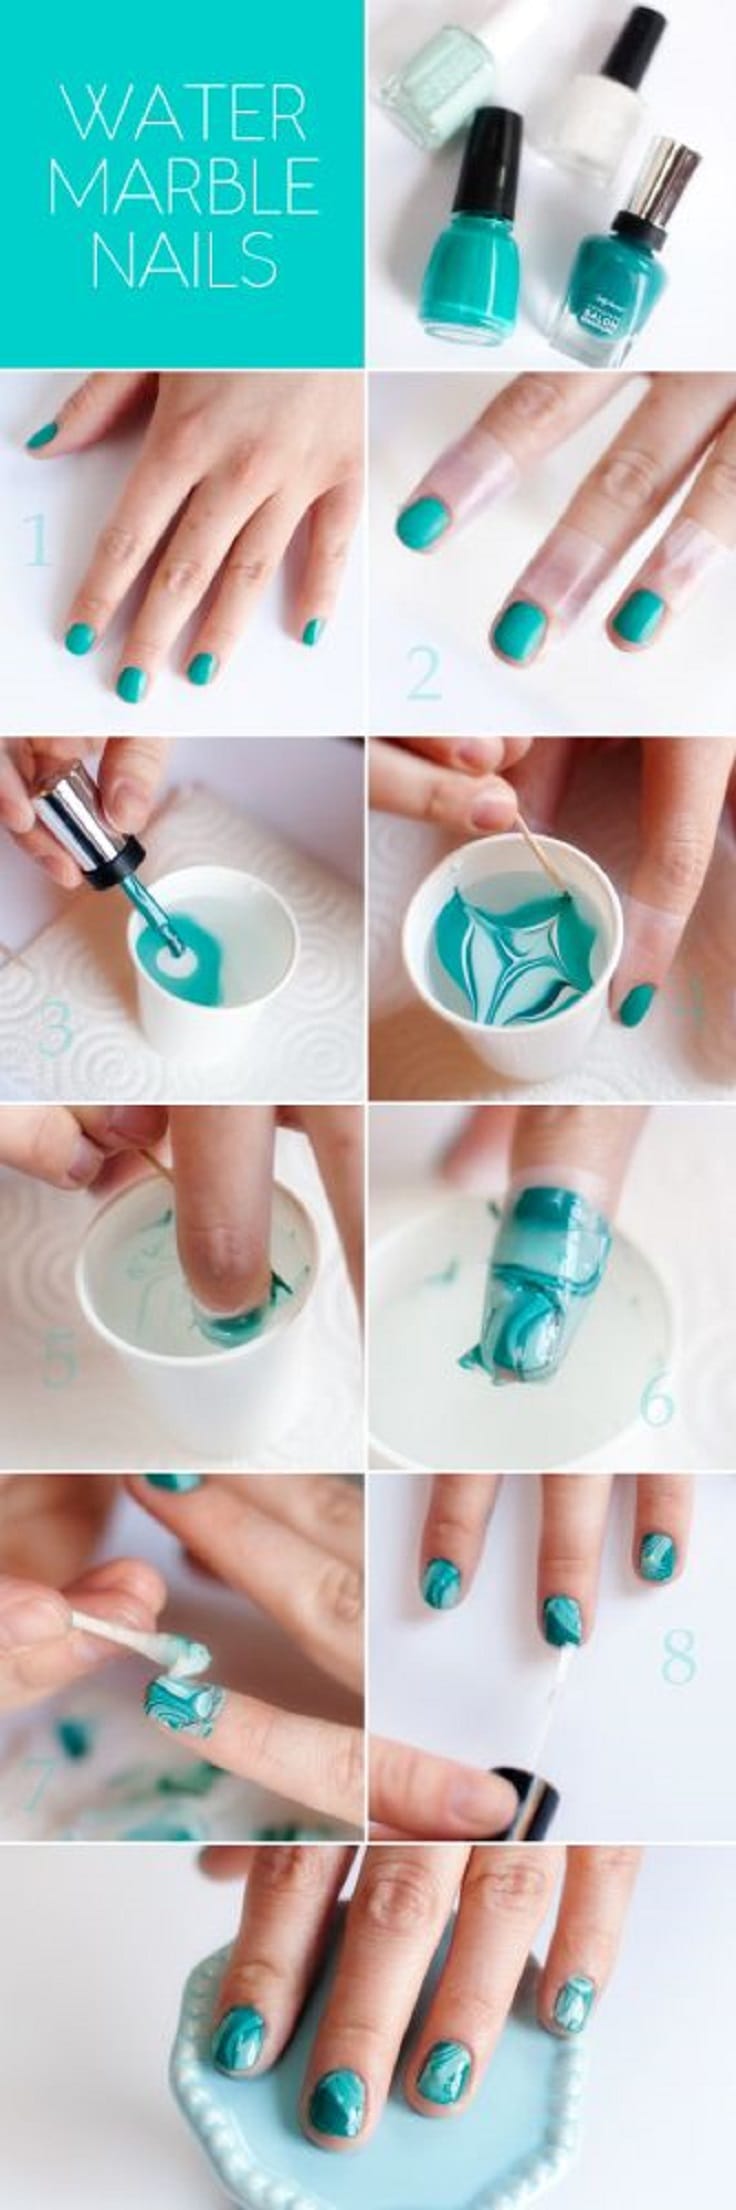 10 Ways To Do A Perfect Manicure At Home And Create Fantastic Nails Design ALL FOR FASHION DESIGN